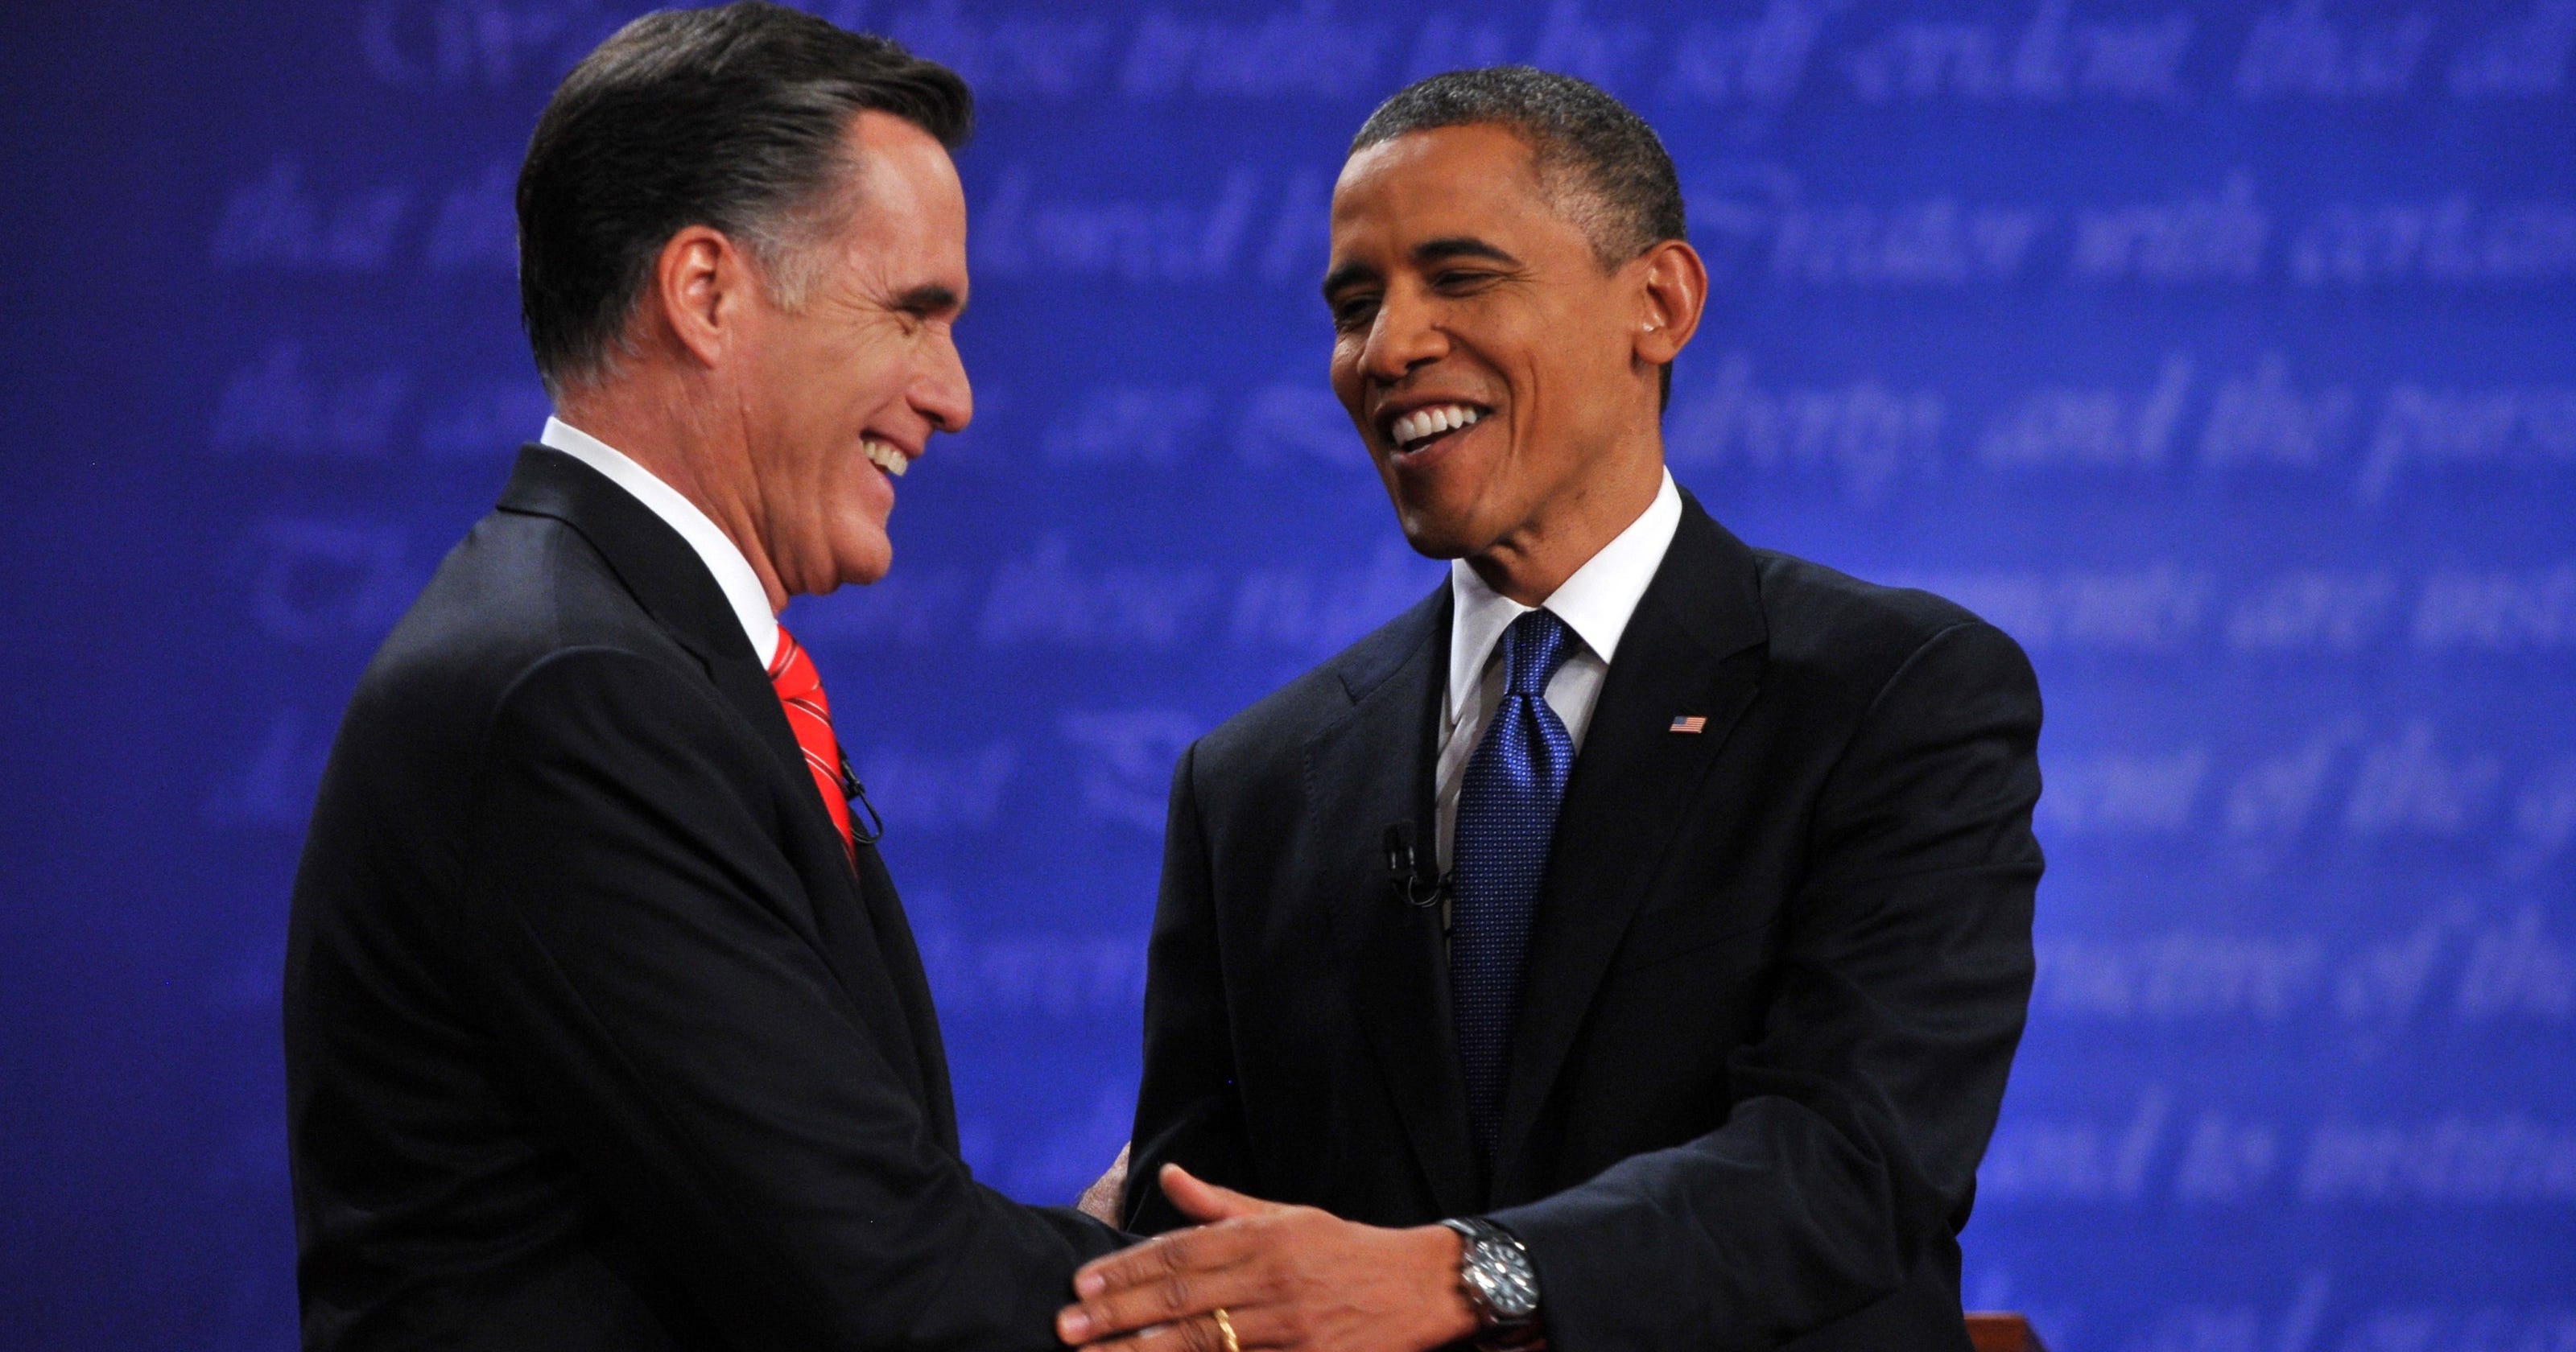 Presidential debate sets record on Twitter3200 x 1680